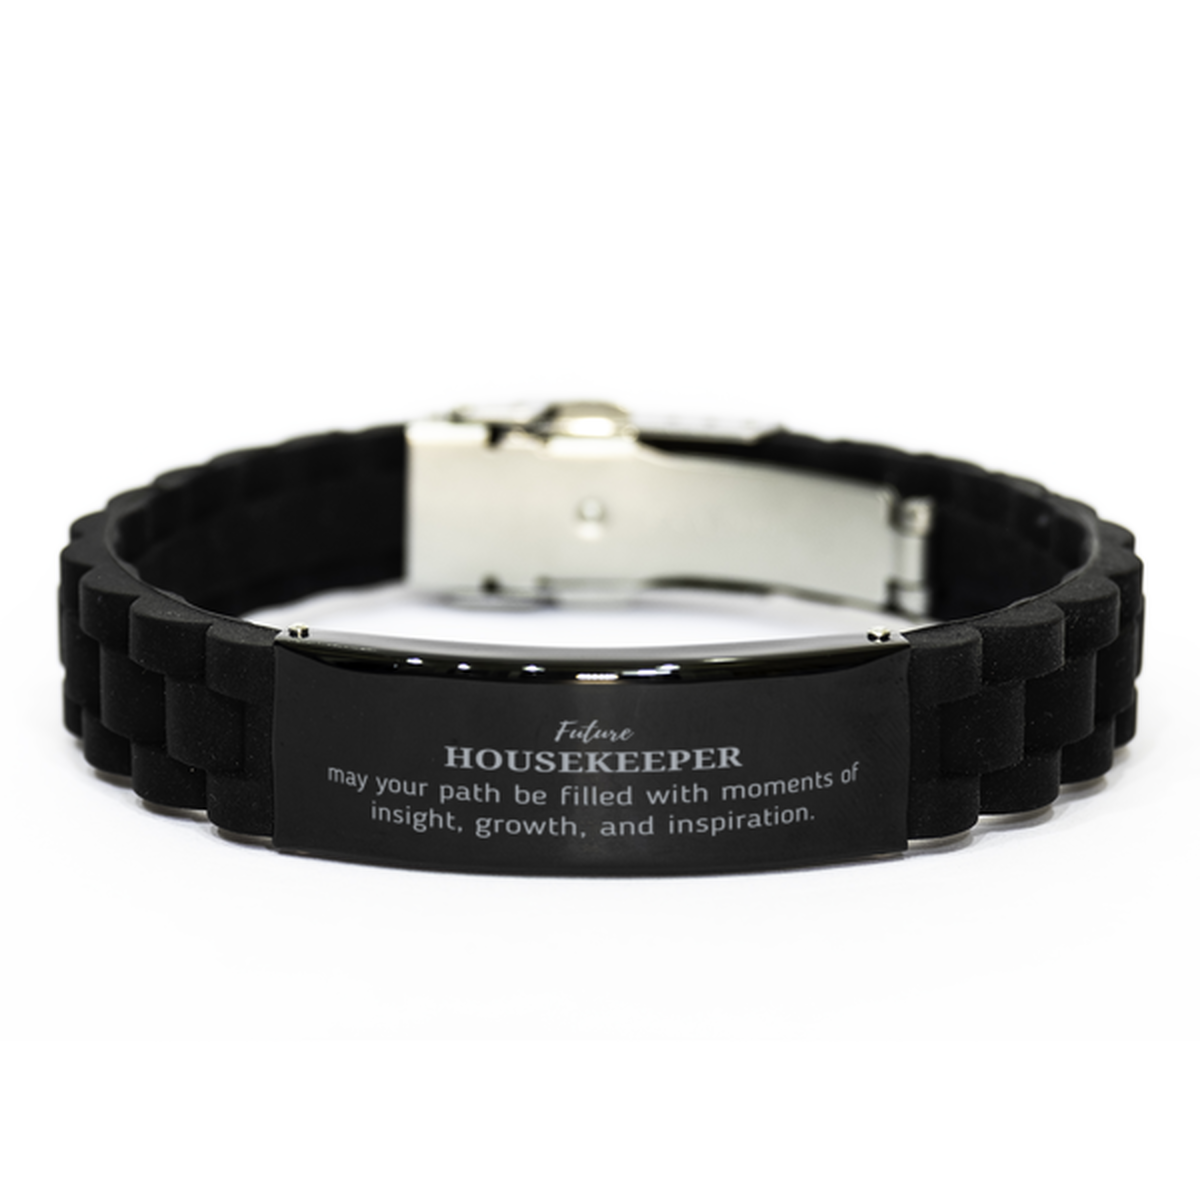 Future Housekeeper Gifts, May your path be filled with moments of insight, Graduation Gifts for New Housekeeper, Christmas Unique Black Glidelock Clasp Bracelet For Men, Women, Friends